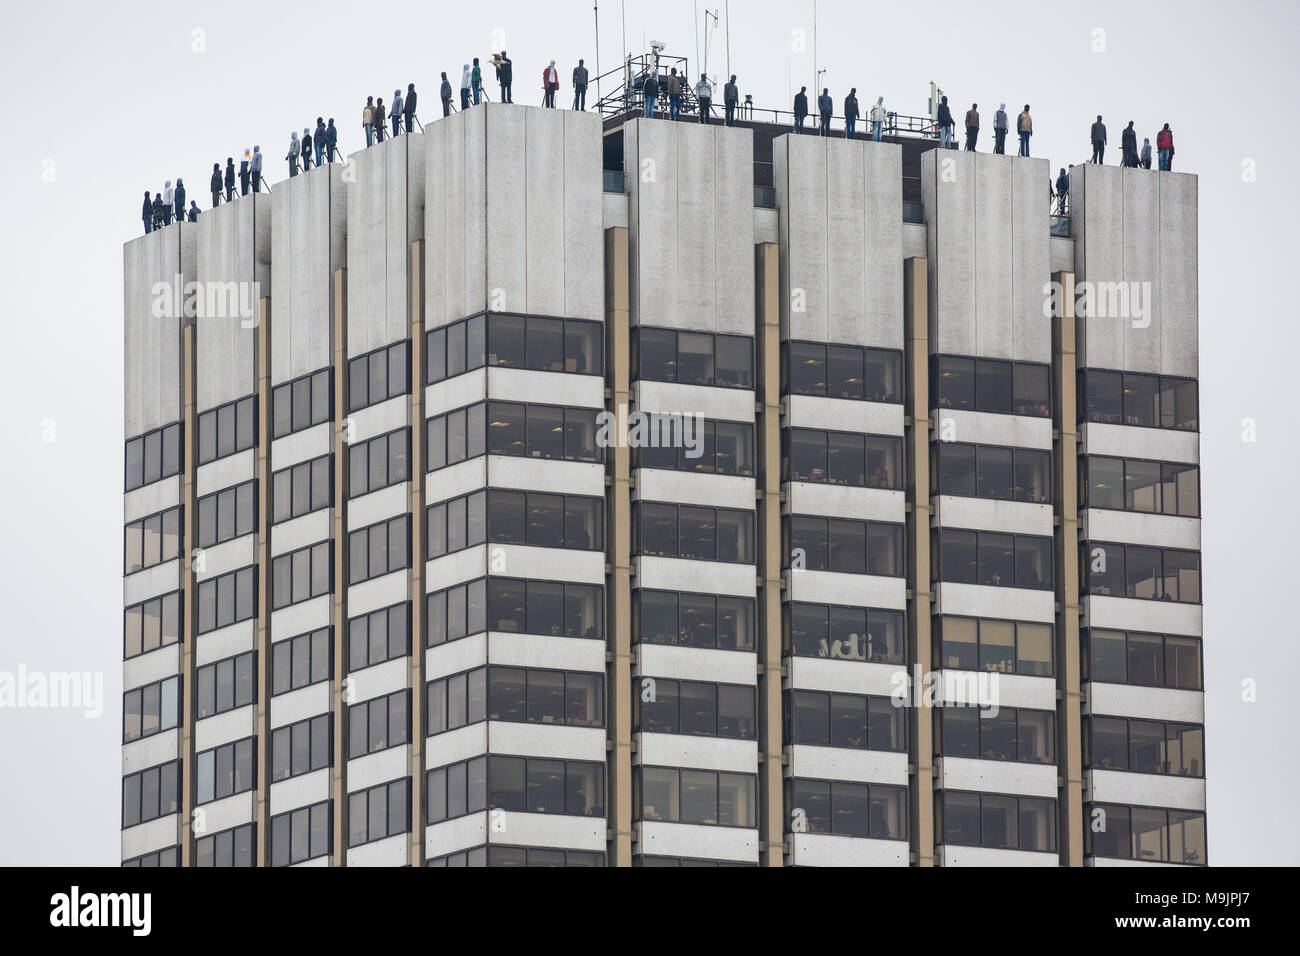 London, UK. 27th March, 2018. 84 life-sized sculptures by Mark Jenkins have been positioned on the top of the ITV Television Centre building as part of Project 84 by the charity CALM (Campaign Against Living Miserably) to represent the 84 men who take their own lives in the UK every week and so to raise awareness of male suicide. Male suicide is the single biggest killer of men under the age of 45 in the UK. Credit: Mark Kerrison/Alamy Live News Stock Photo